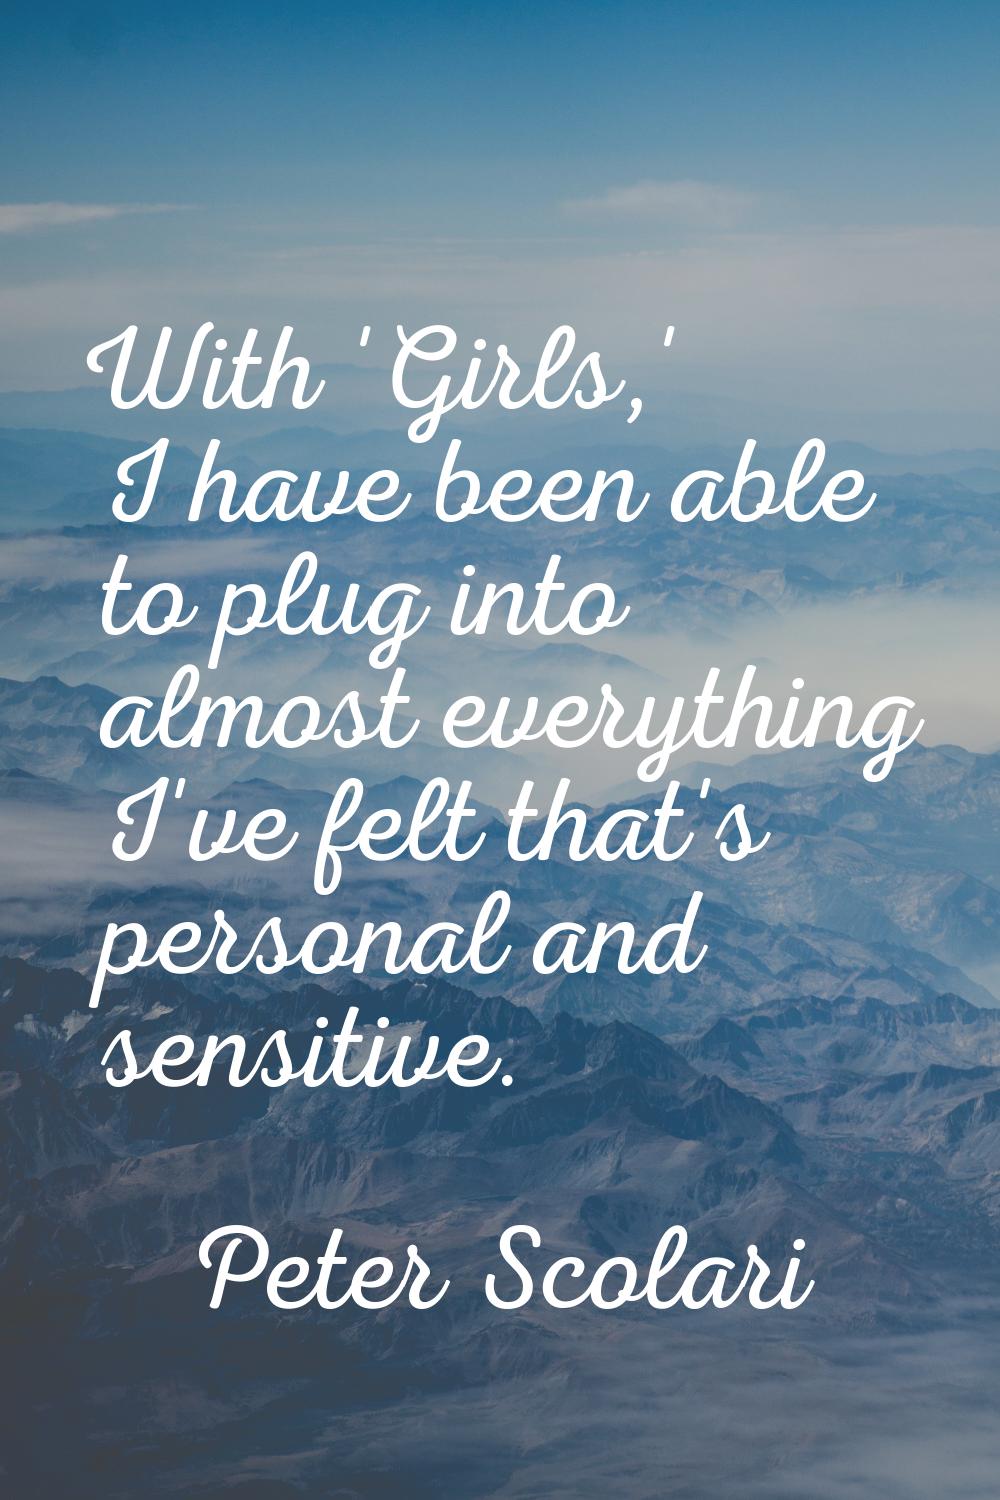 With 'Girls,' I have been able to plug into almost everything I've felt that's personal and sensiti